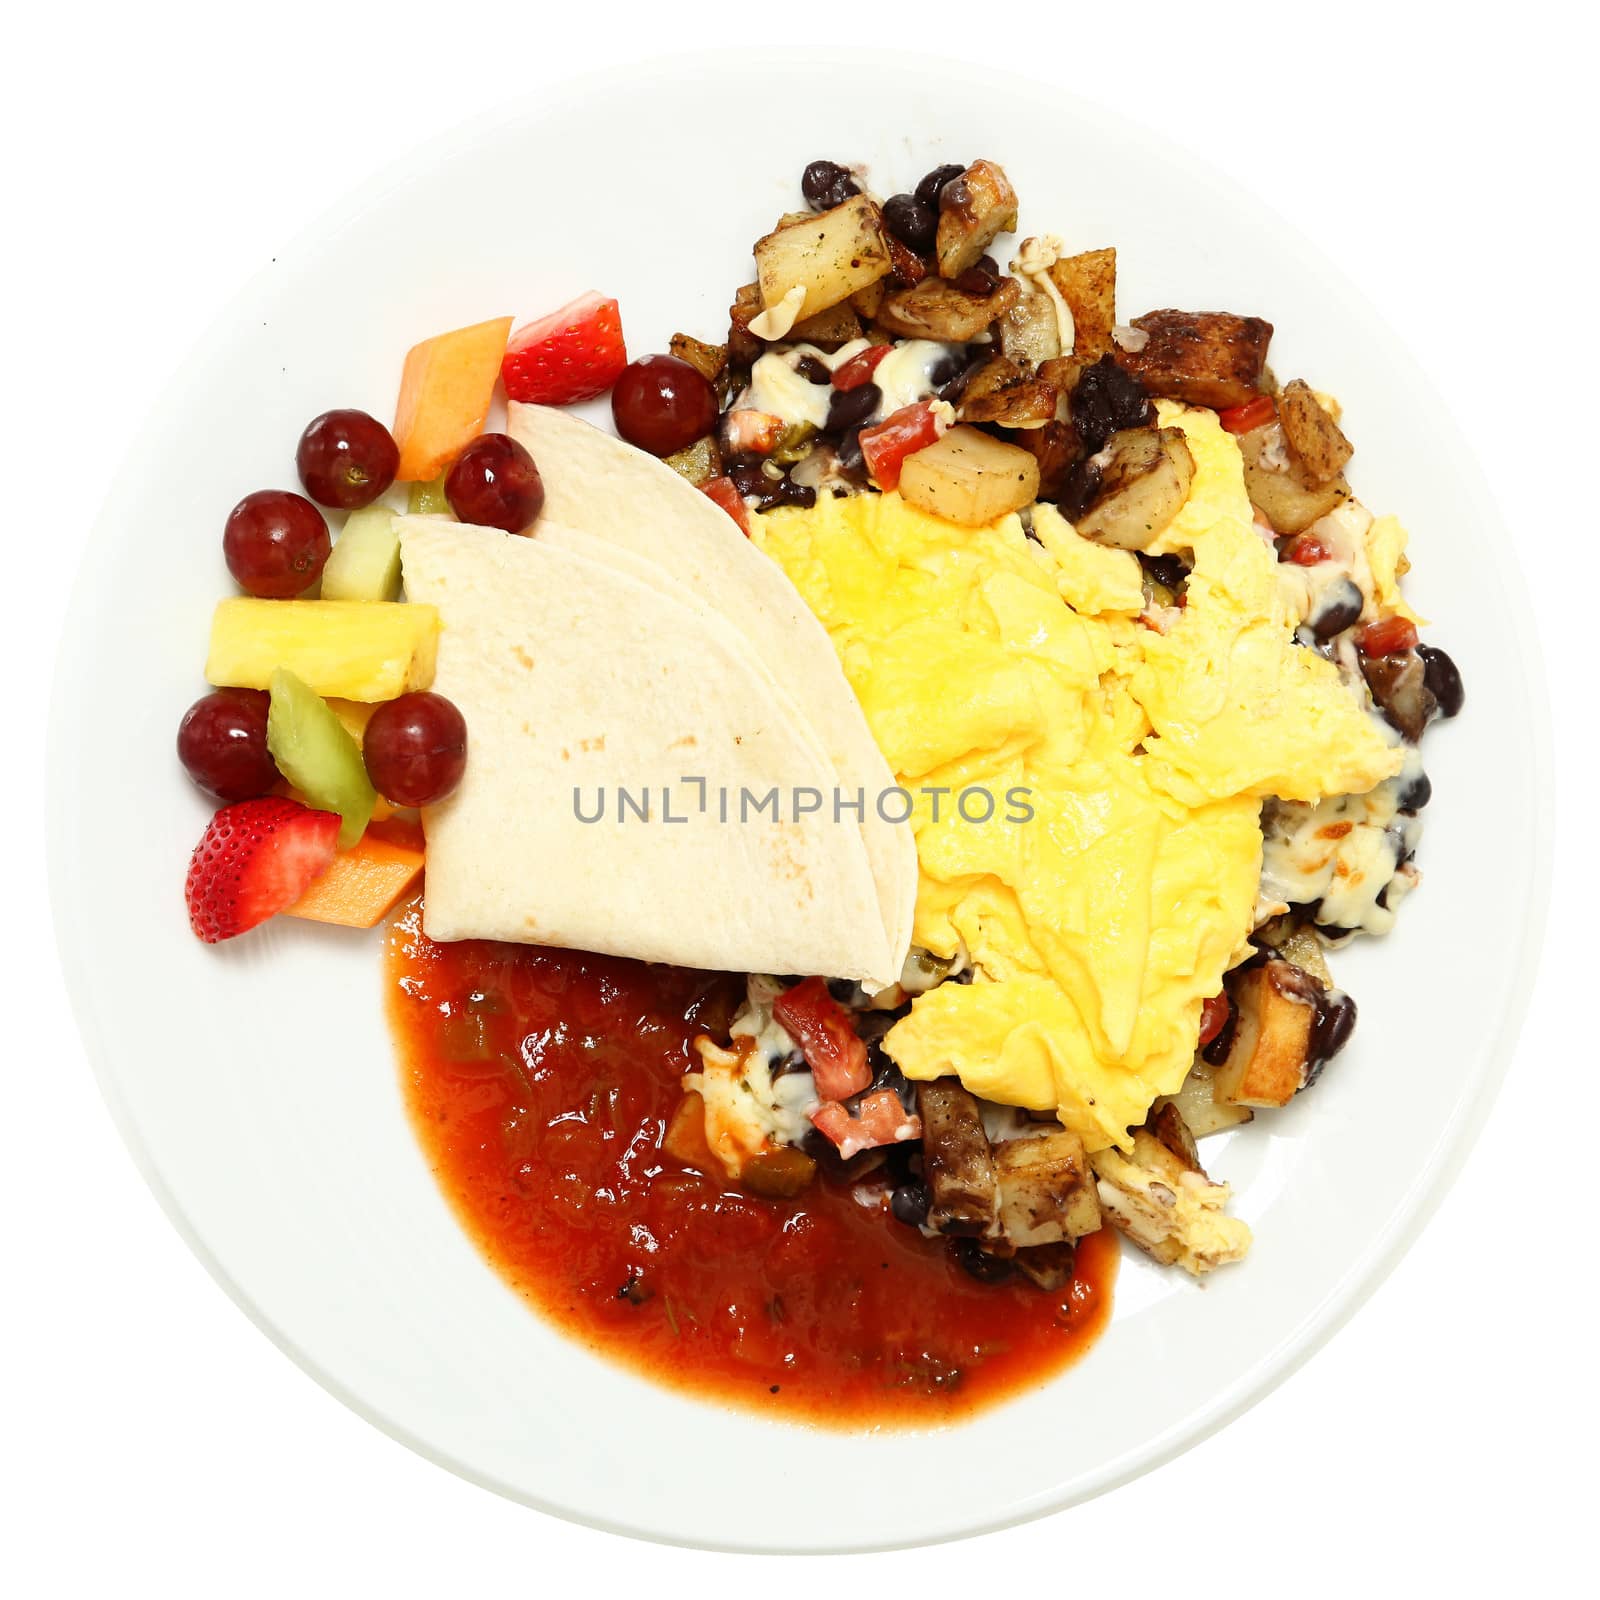 Mexican Eggs with Salsa, Potatoes, Fruit over white.